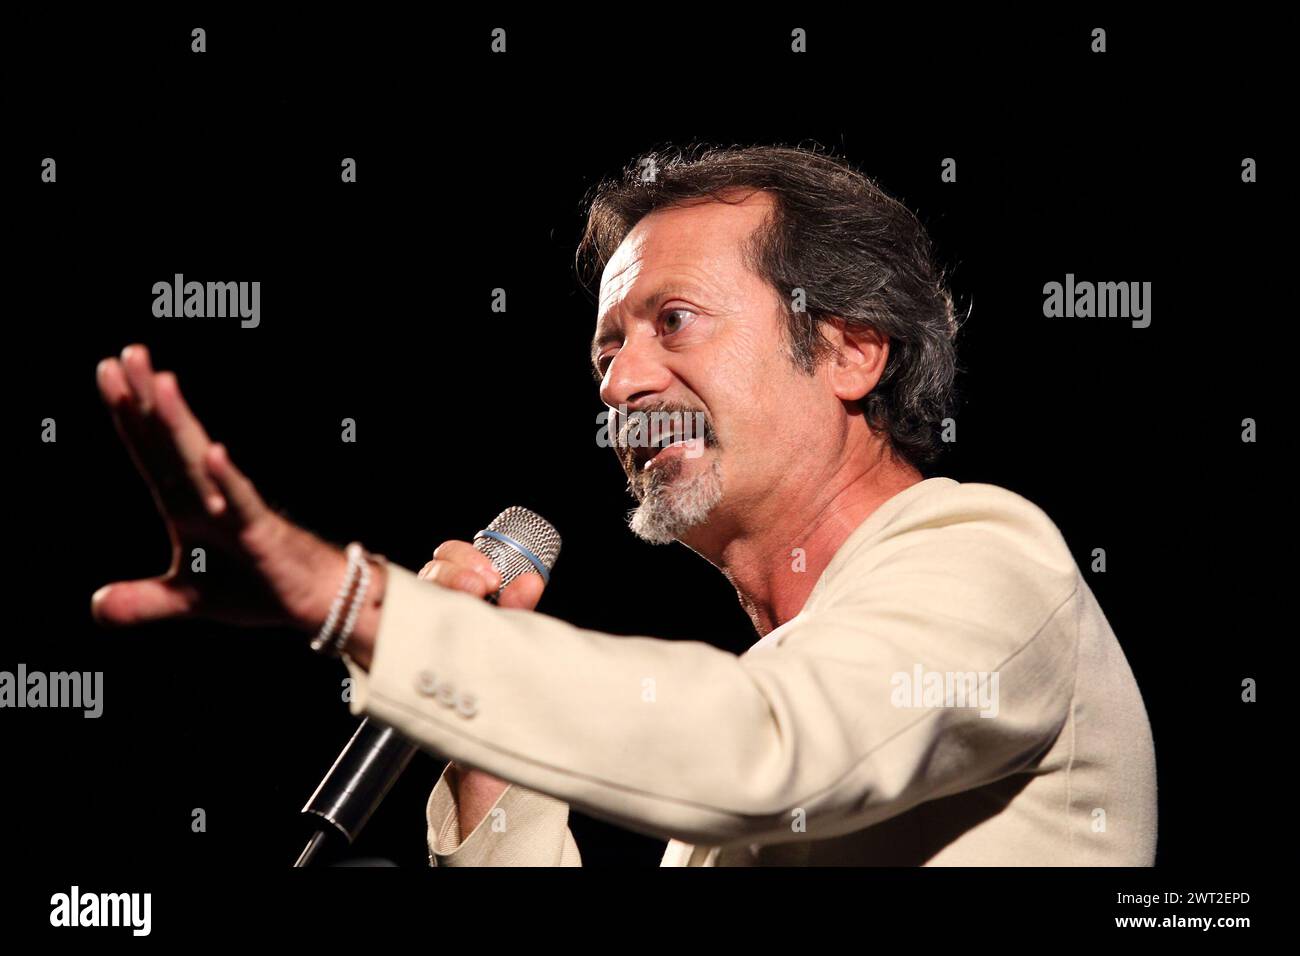 The italian actor Rocco Papaleo performs live at Pomigliano Jazz Festival Stock Photo